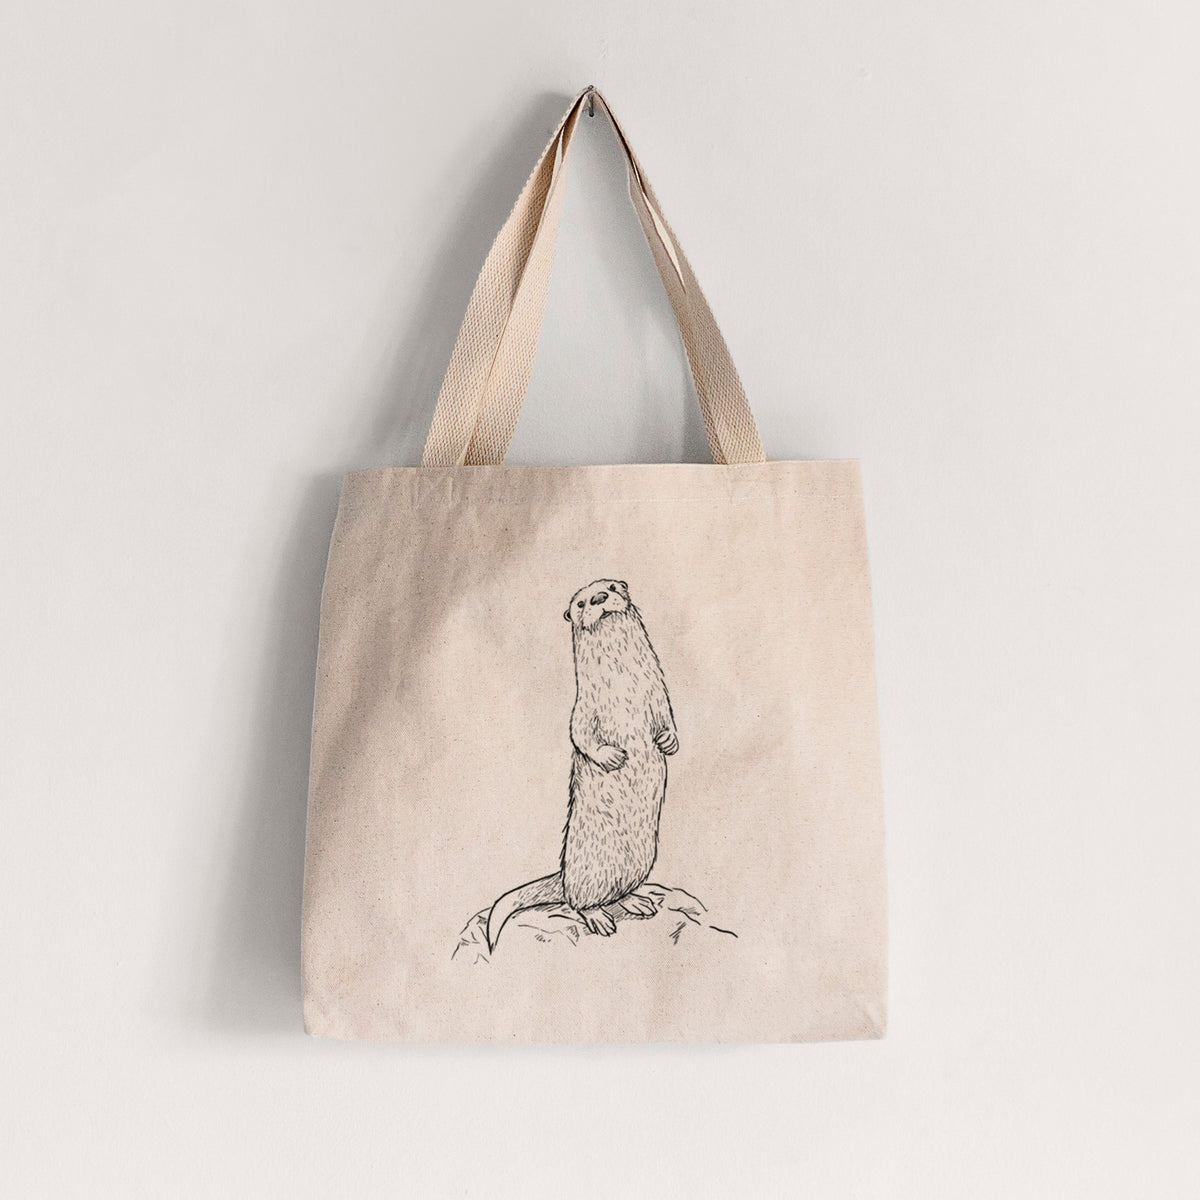 North American River Otter - Lontra canadensis - Tote Bag